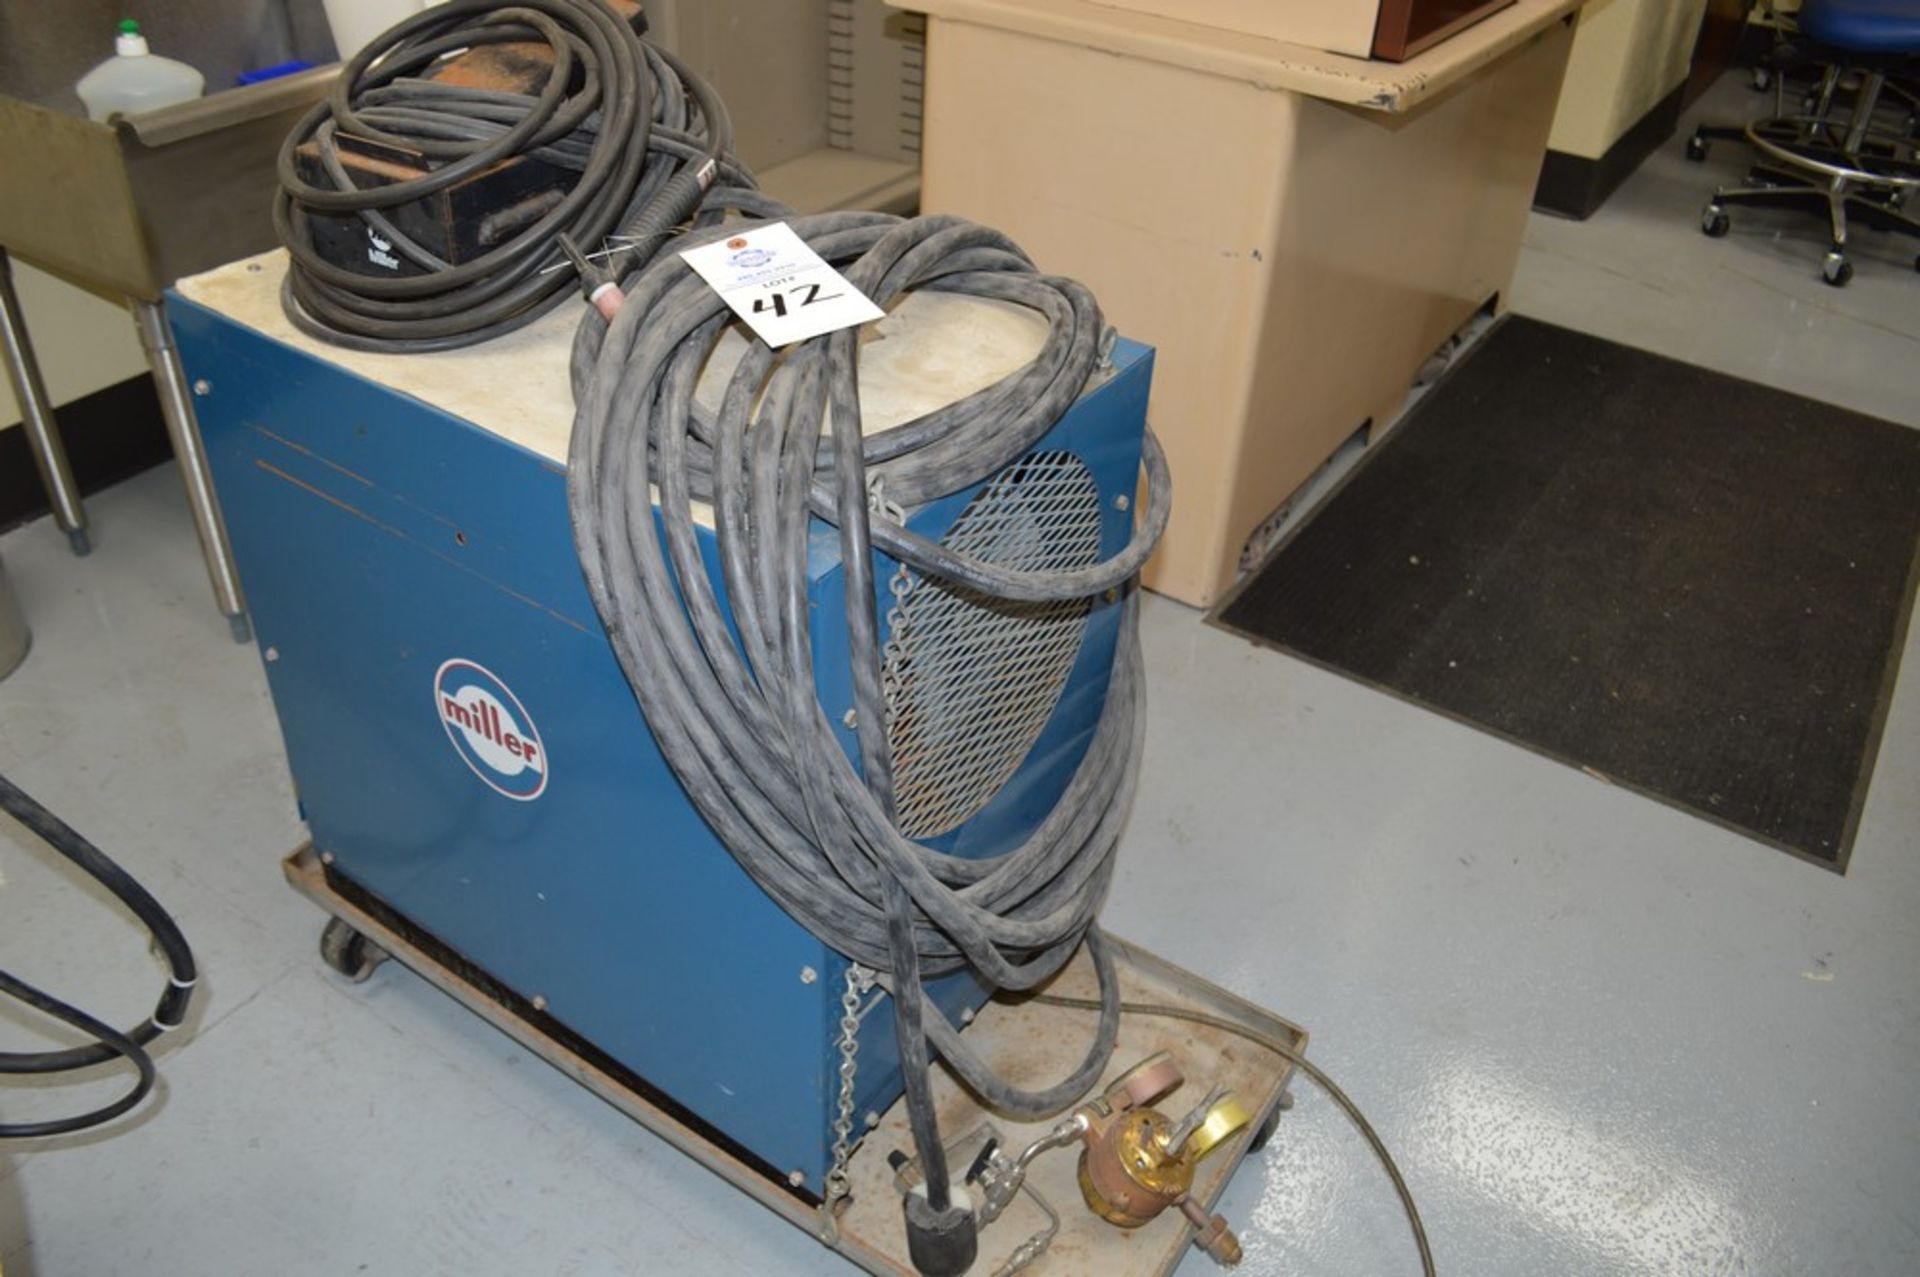 Miller SR-150-32 DC Welder on metal rolling cart, foot pedal and gas lines included